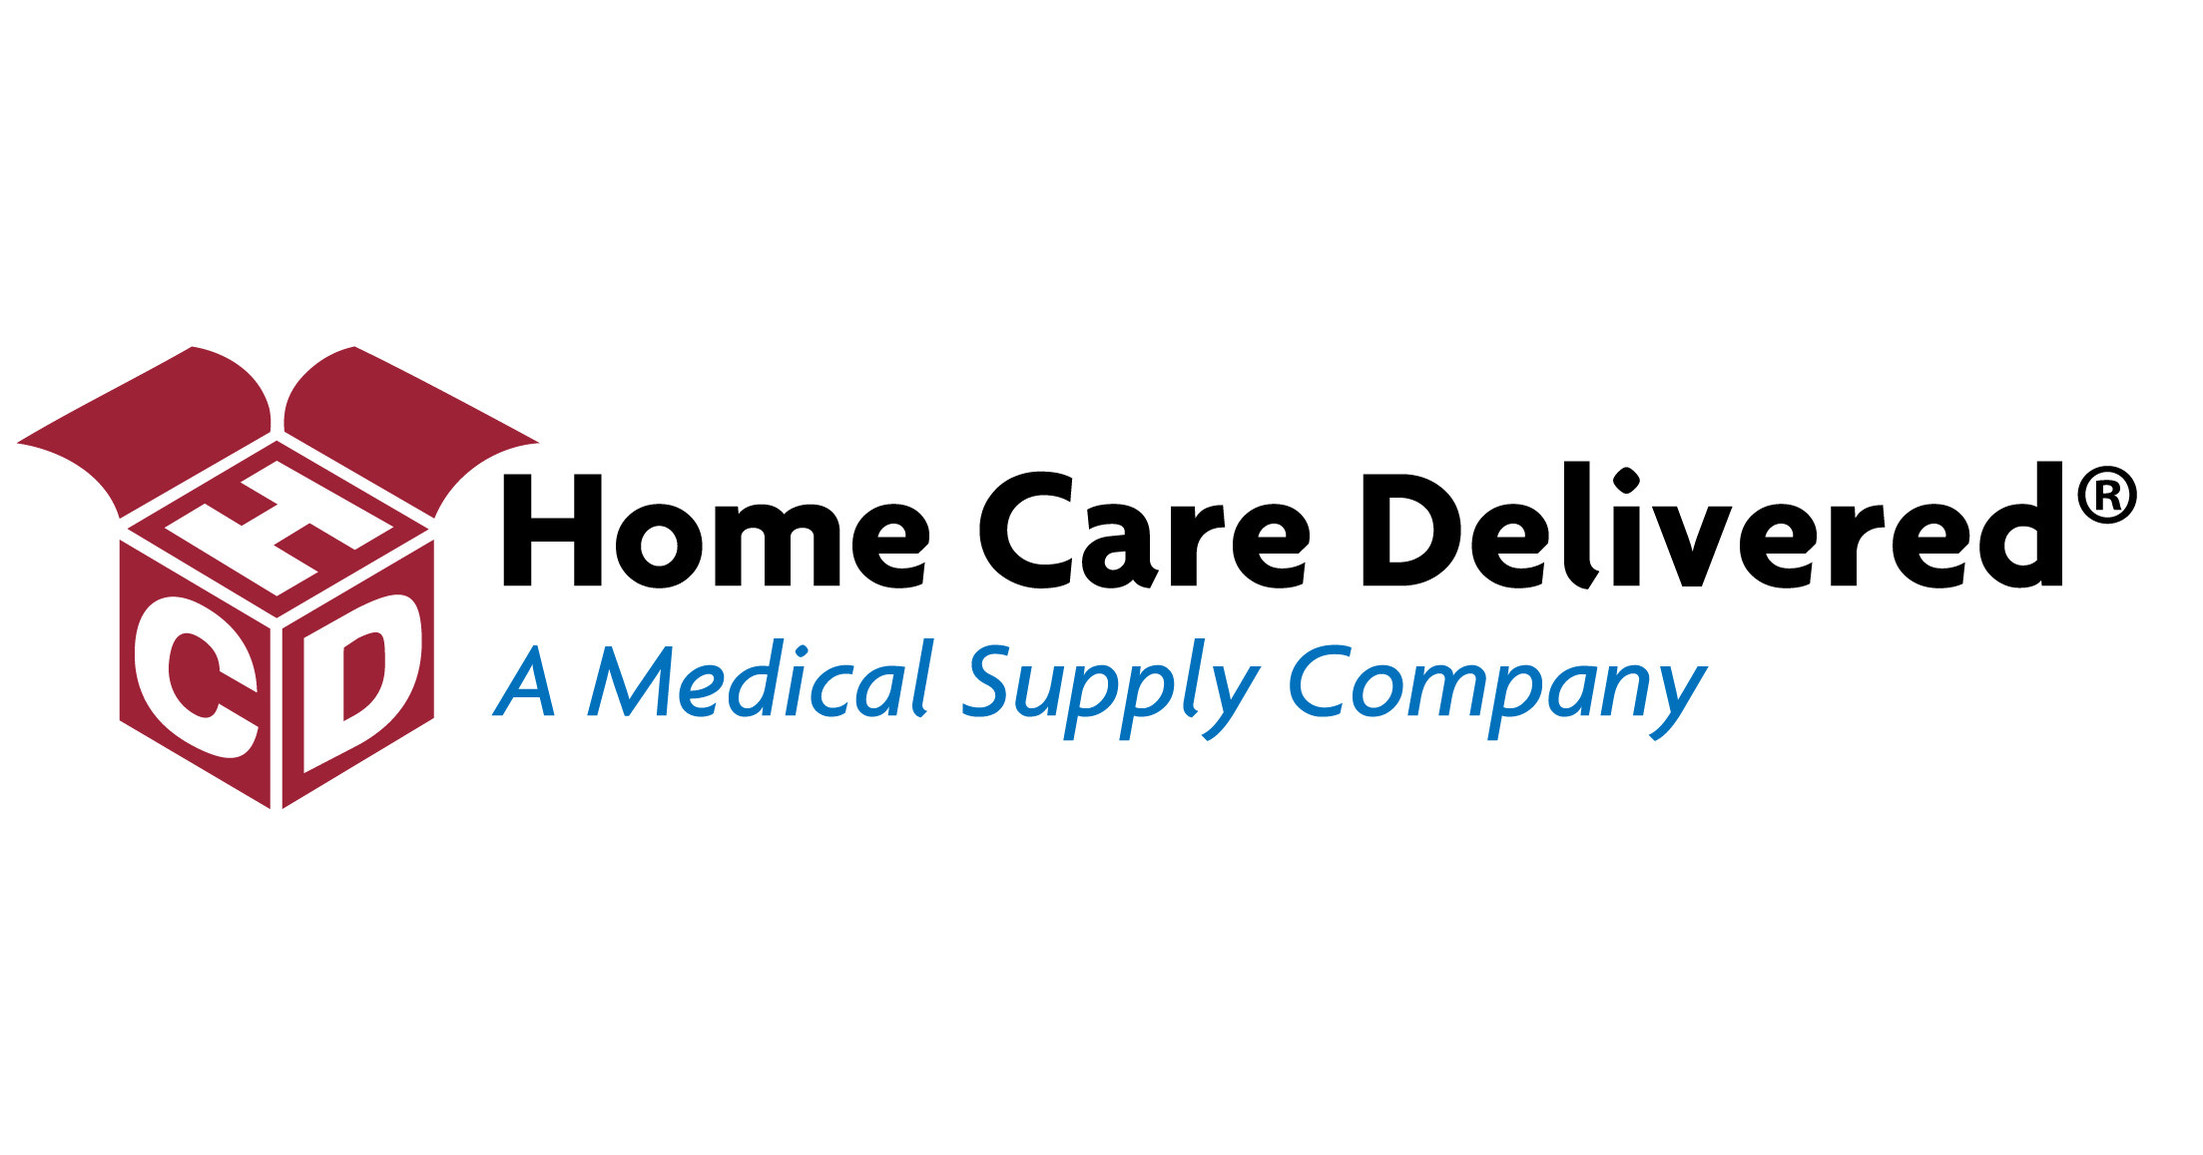 Insurance-Covered Ostomy Medical Supplies - Home Care Delivered